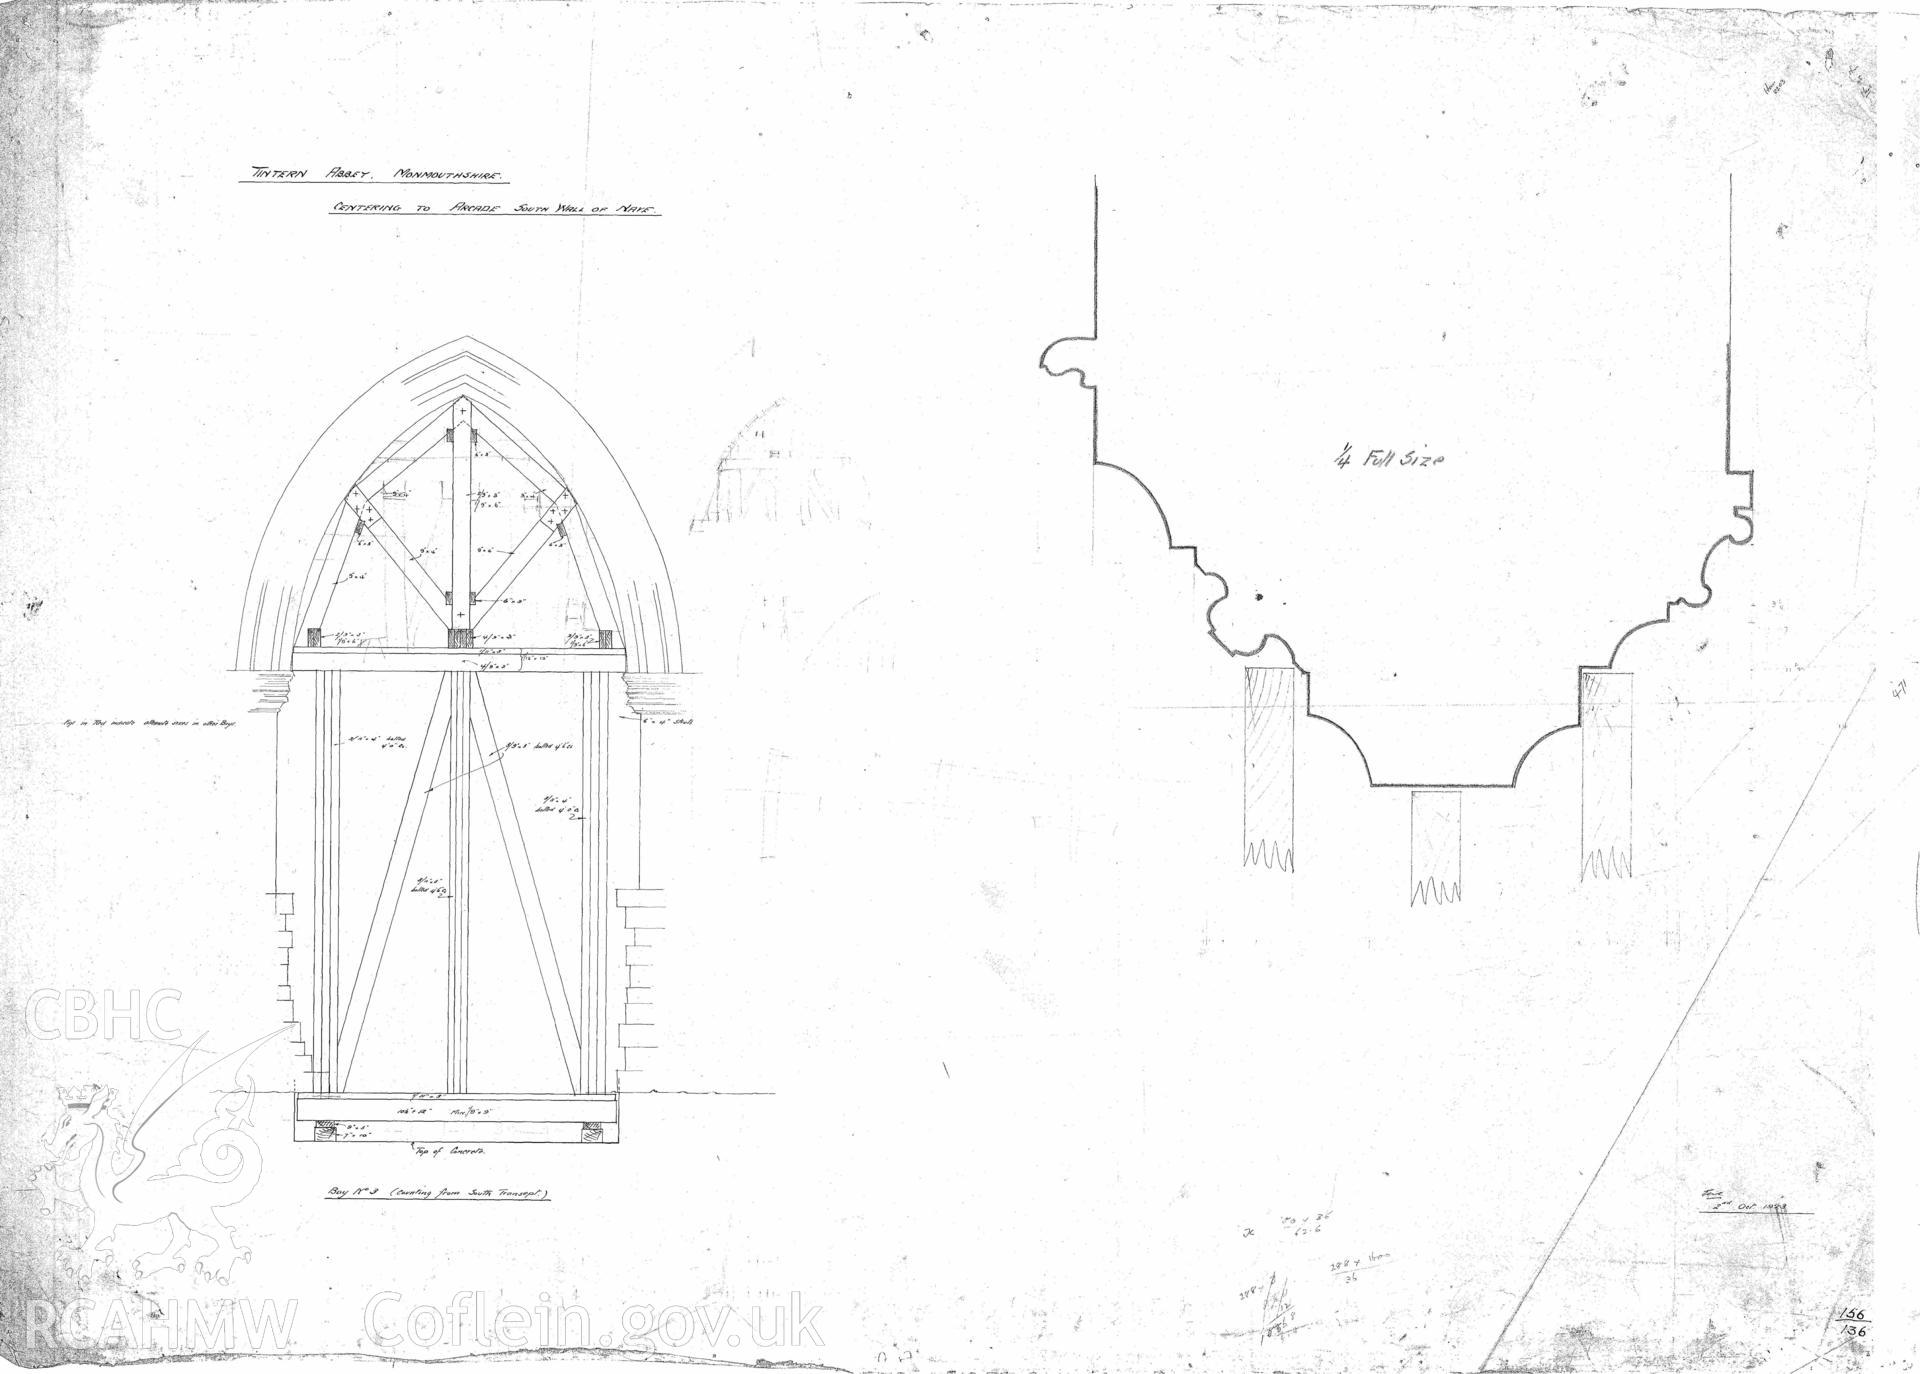 Cadw guardianship monument drawing of Tintern Abbey. Centering to Arcade S Wall of Nave. Cadw ref. No. 156/136. Various scales.